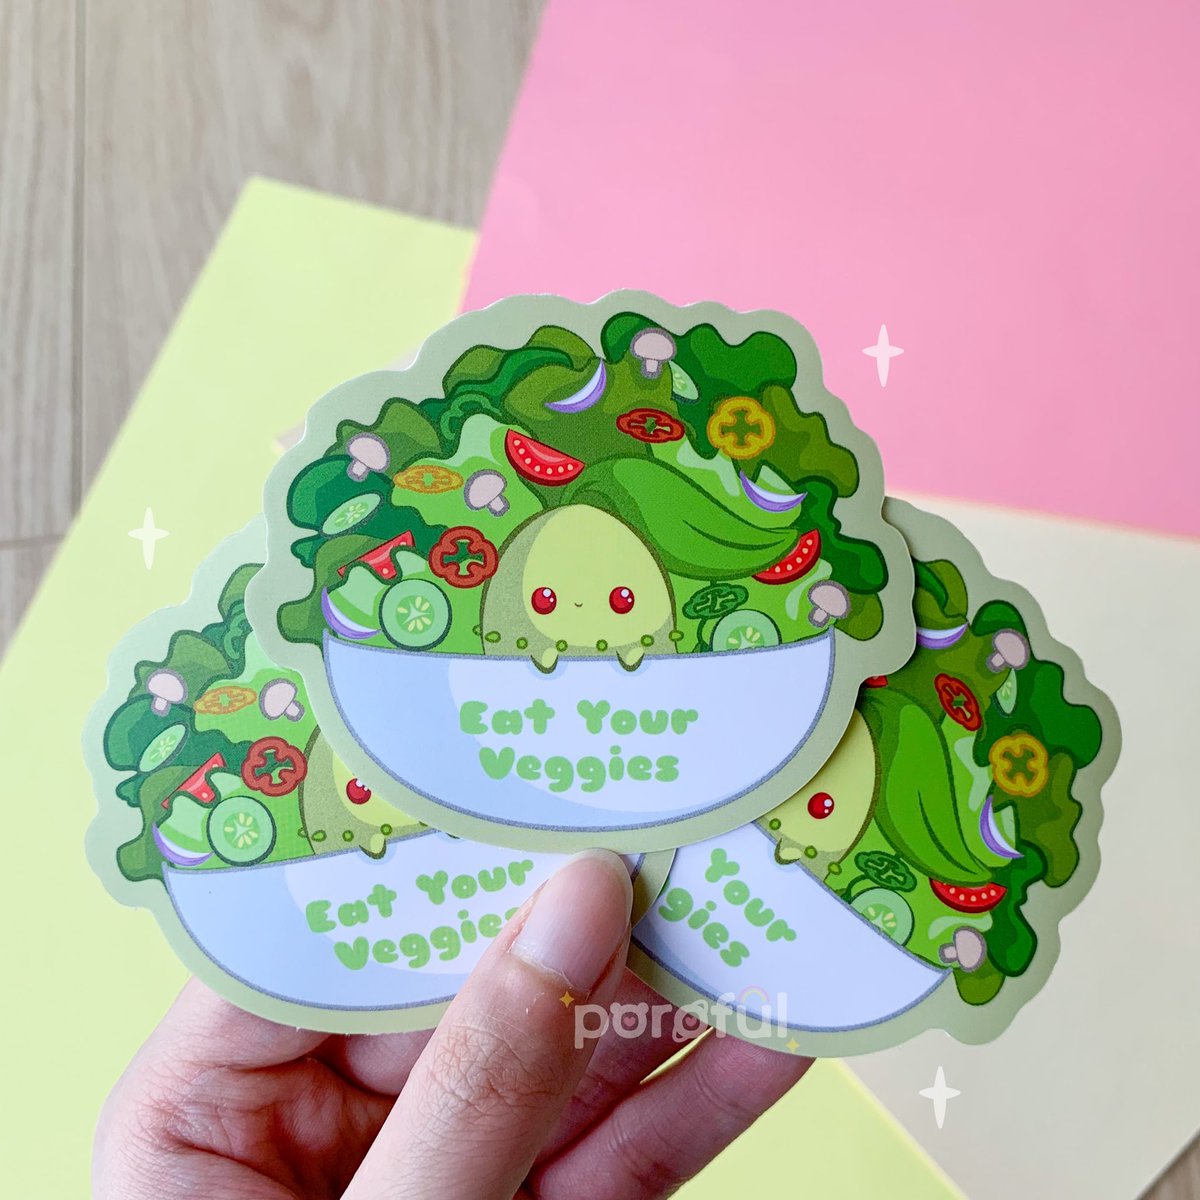 chikorota here to remind you to eat your veggies...except bean sprouts bc those stuff are gross 🤭 #KawaiiStickers